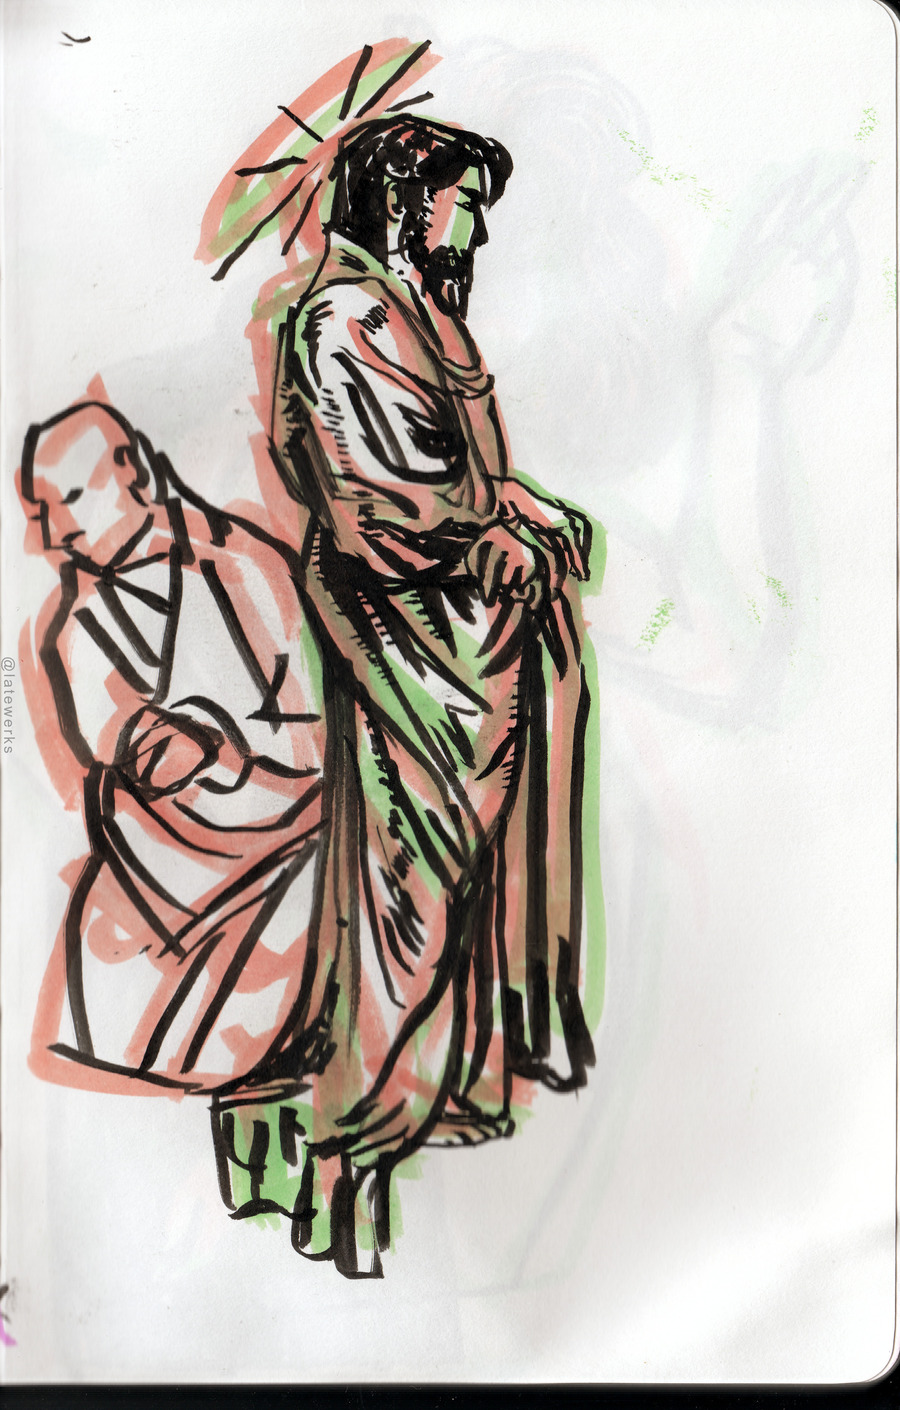 Sketch Club meeting, drawing from classical painting